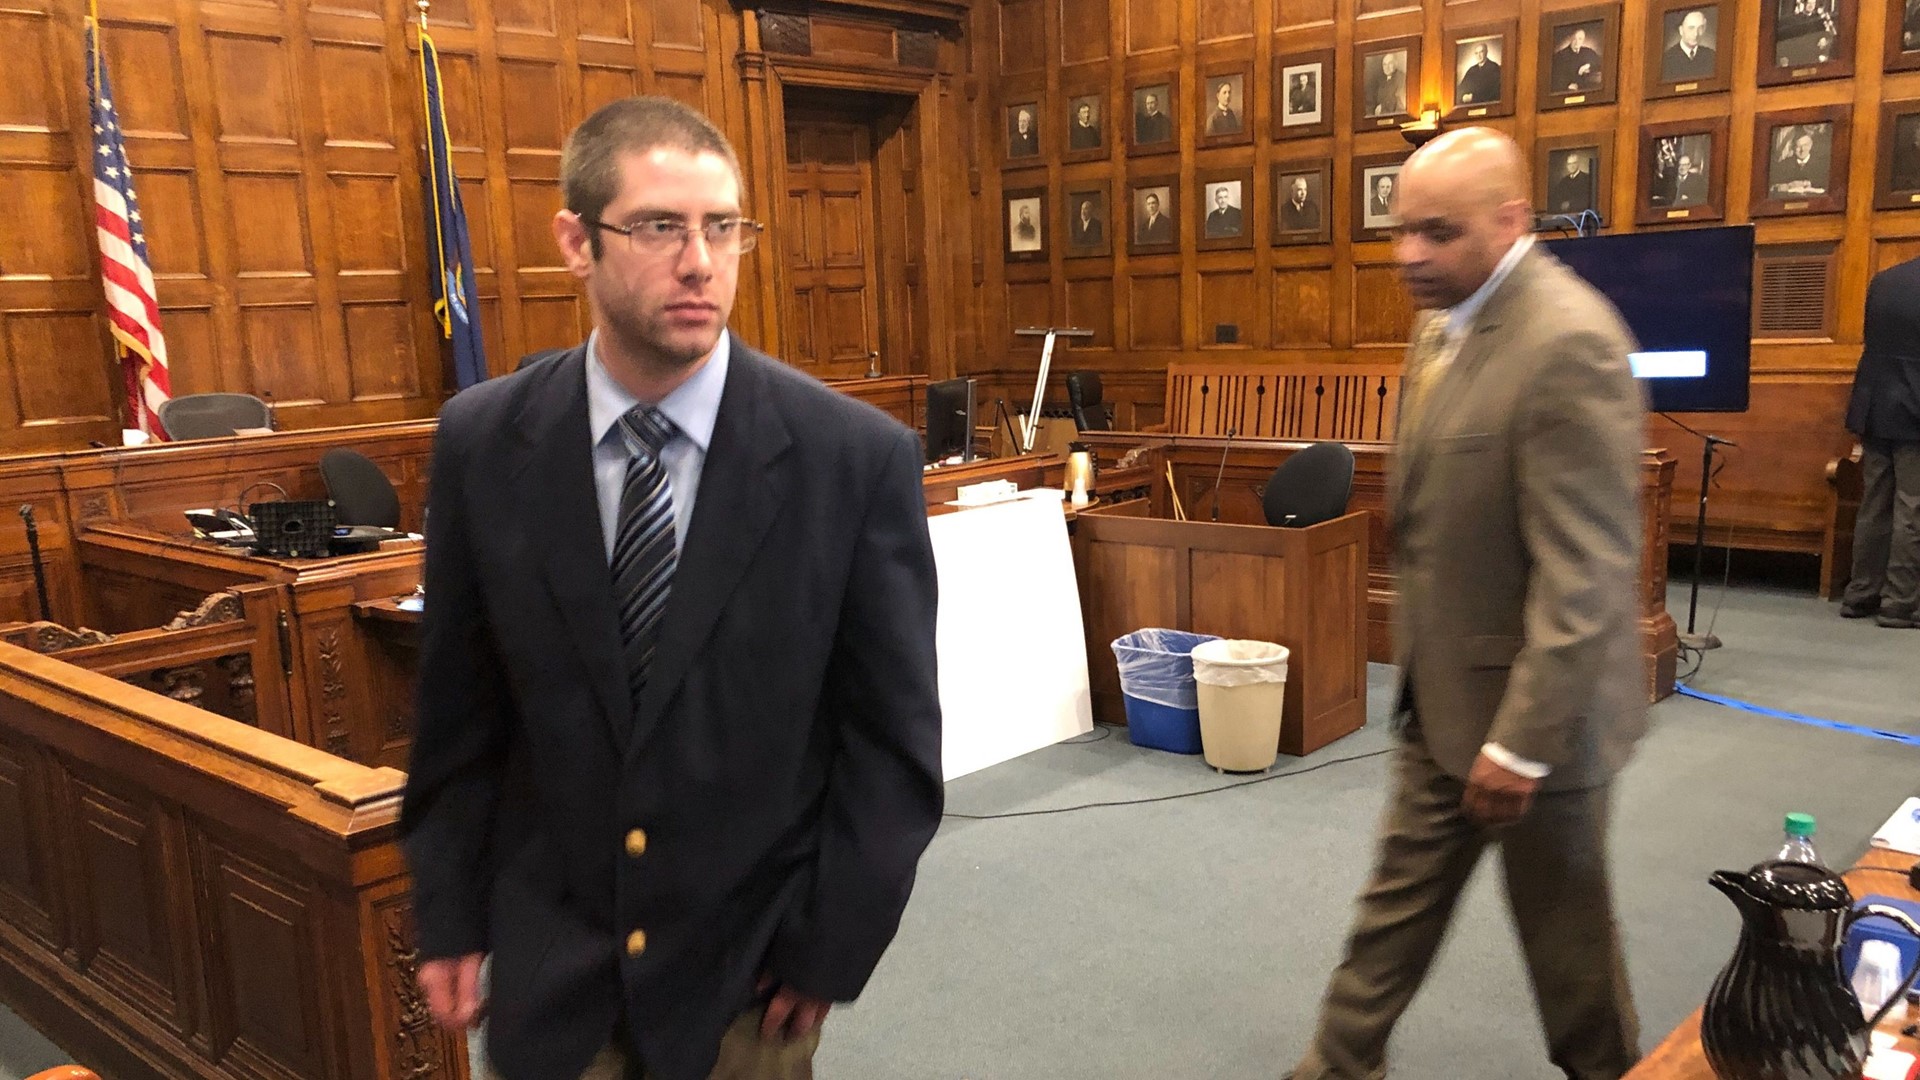 Closing arguments were expected to begin Monday morning in Cumberland County in the trial of the man accused of killing Somerset County Sheriff's Deputy Eugene Cole.